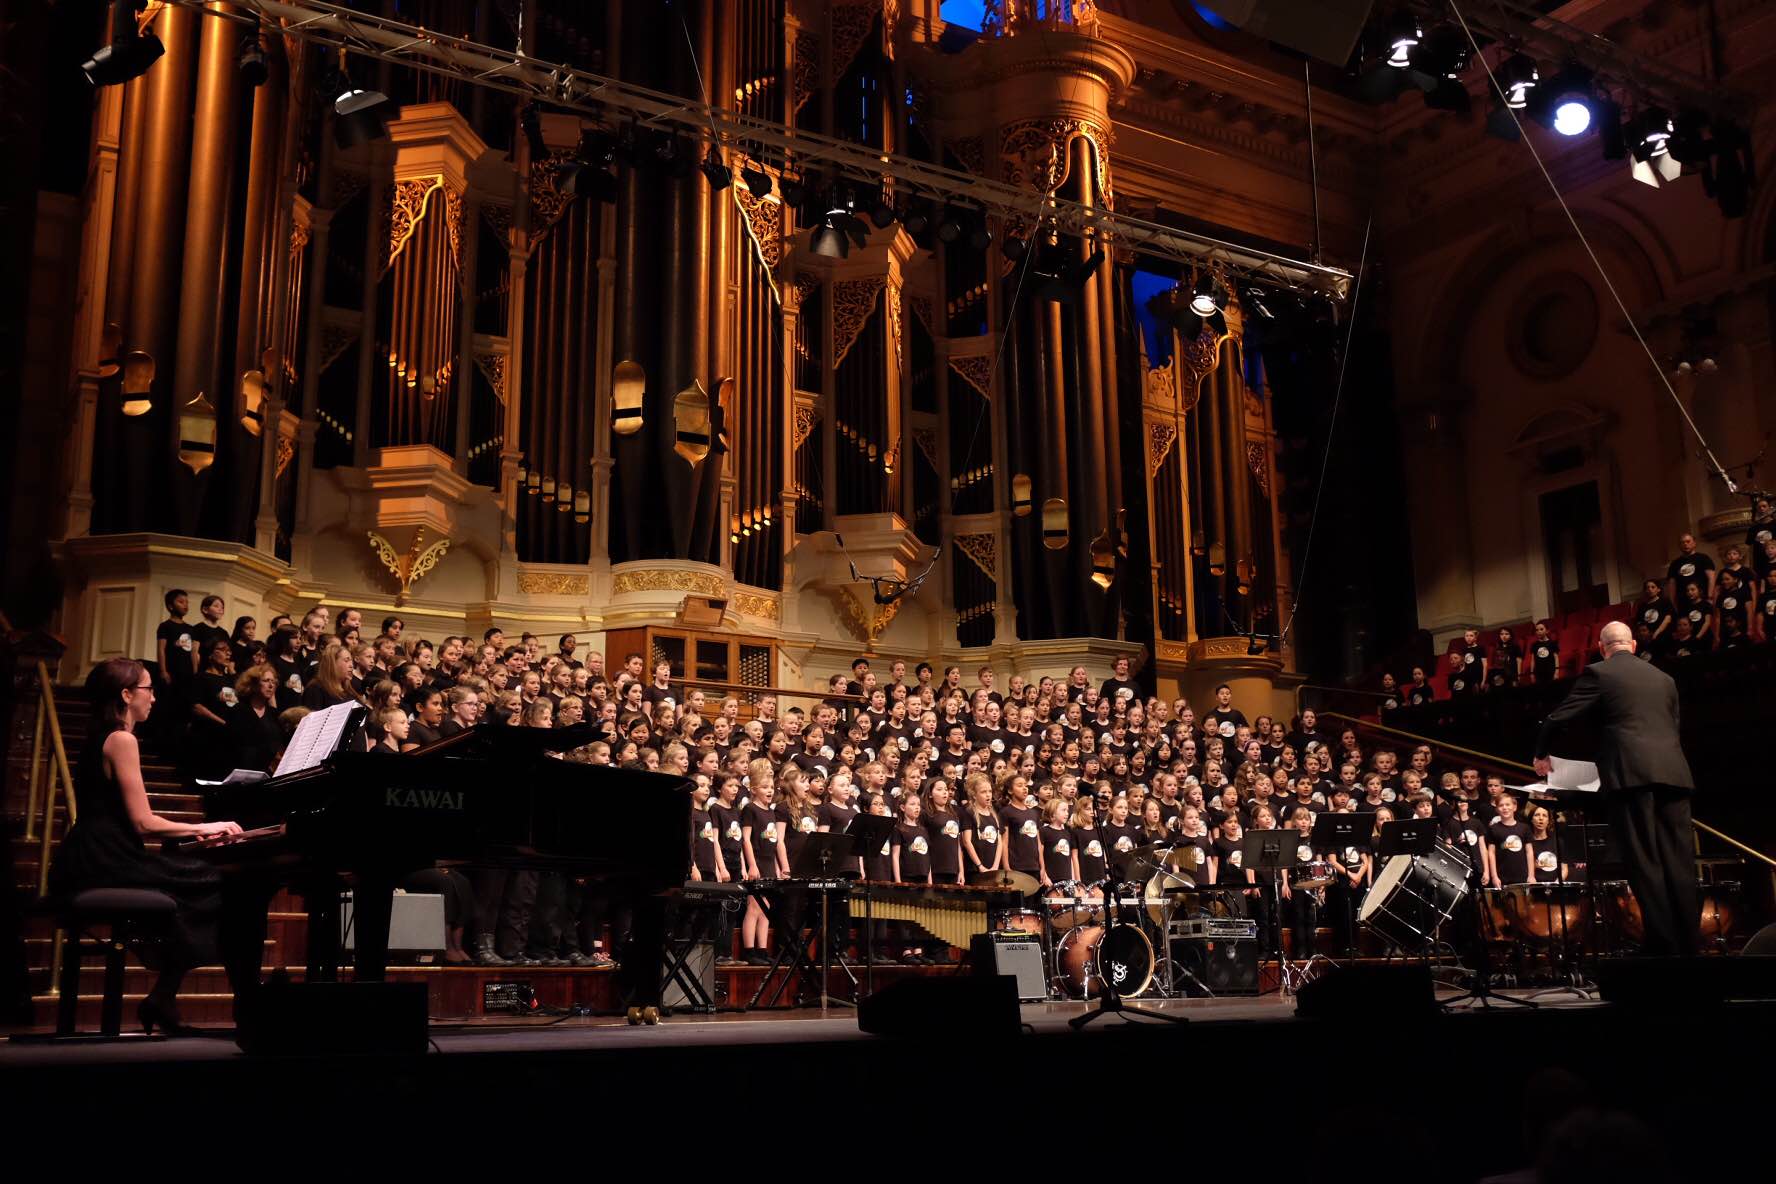 NSW Primary Proms Combined Choir 2015, guest conductor Mr. John Benson